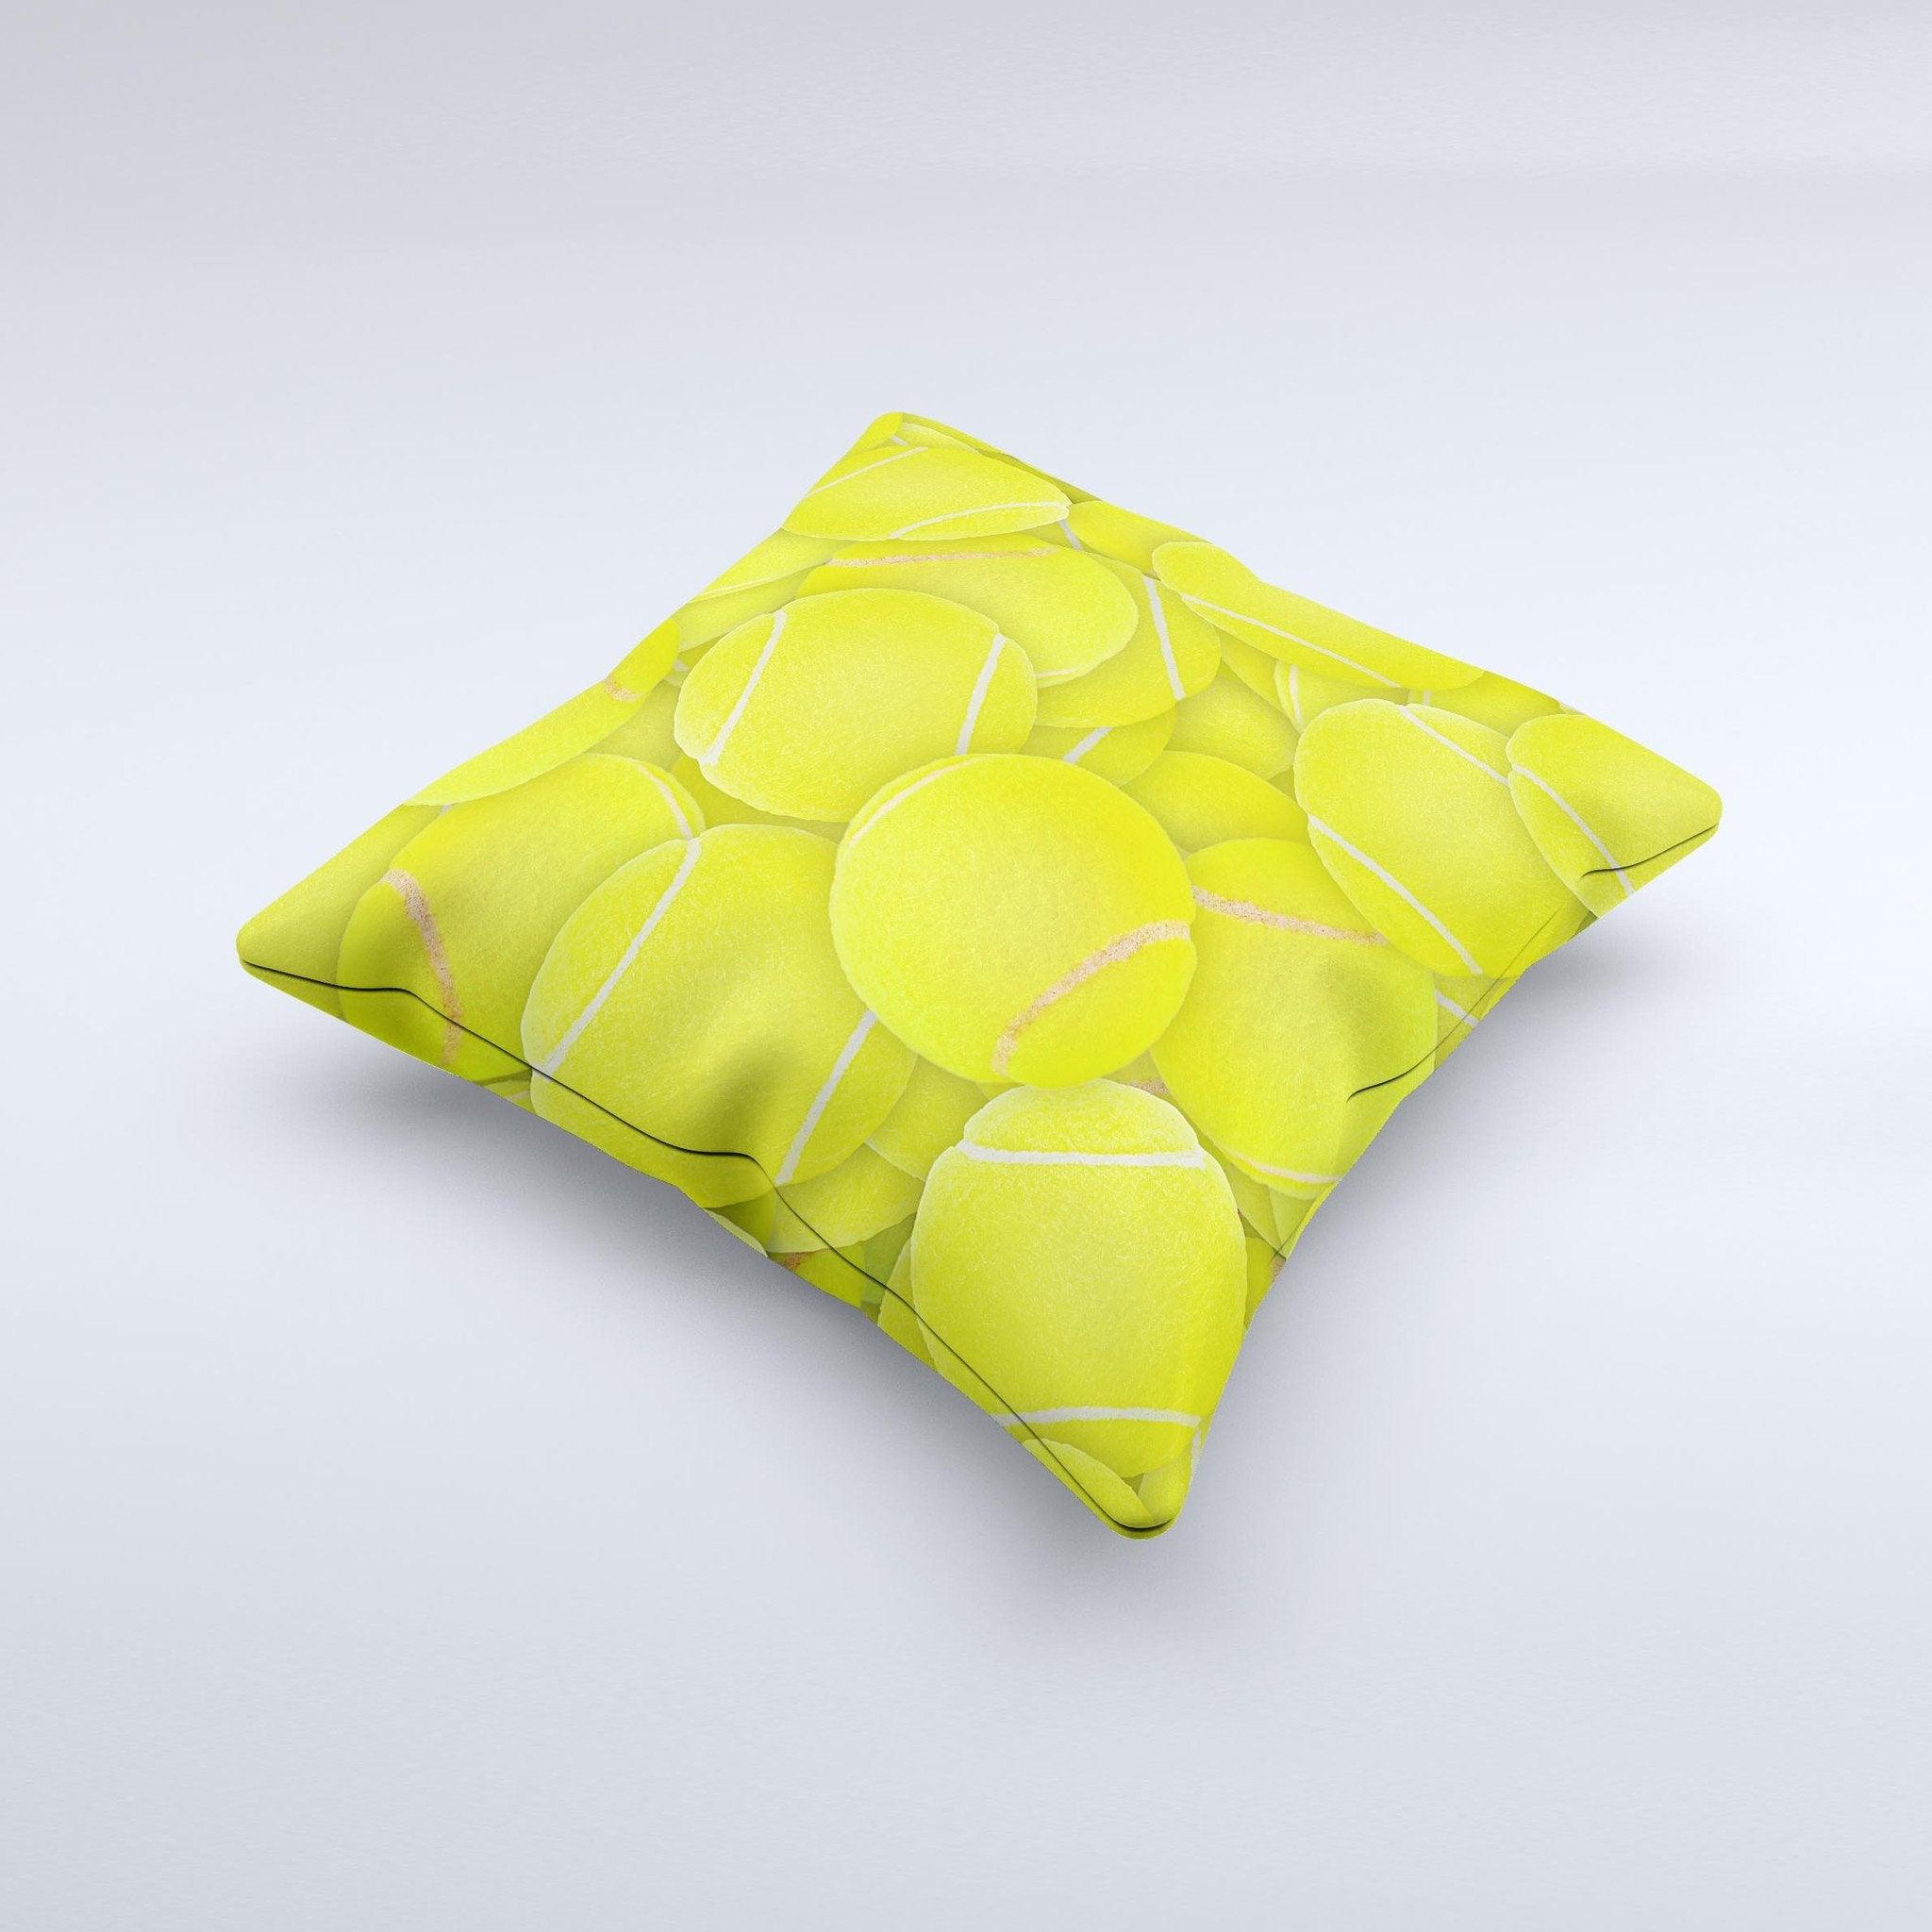 Tennis Ball Overlay Ink-Fuzed Decorative Throw Pillow - VirtuousWares:Global